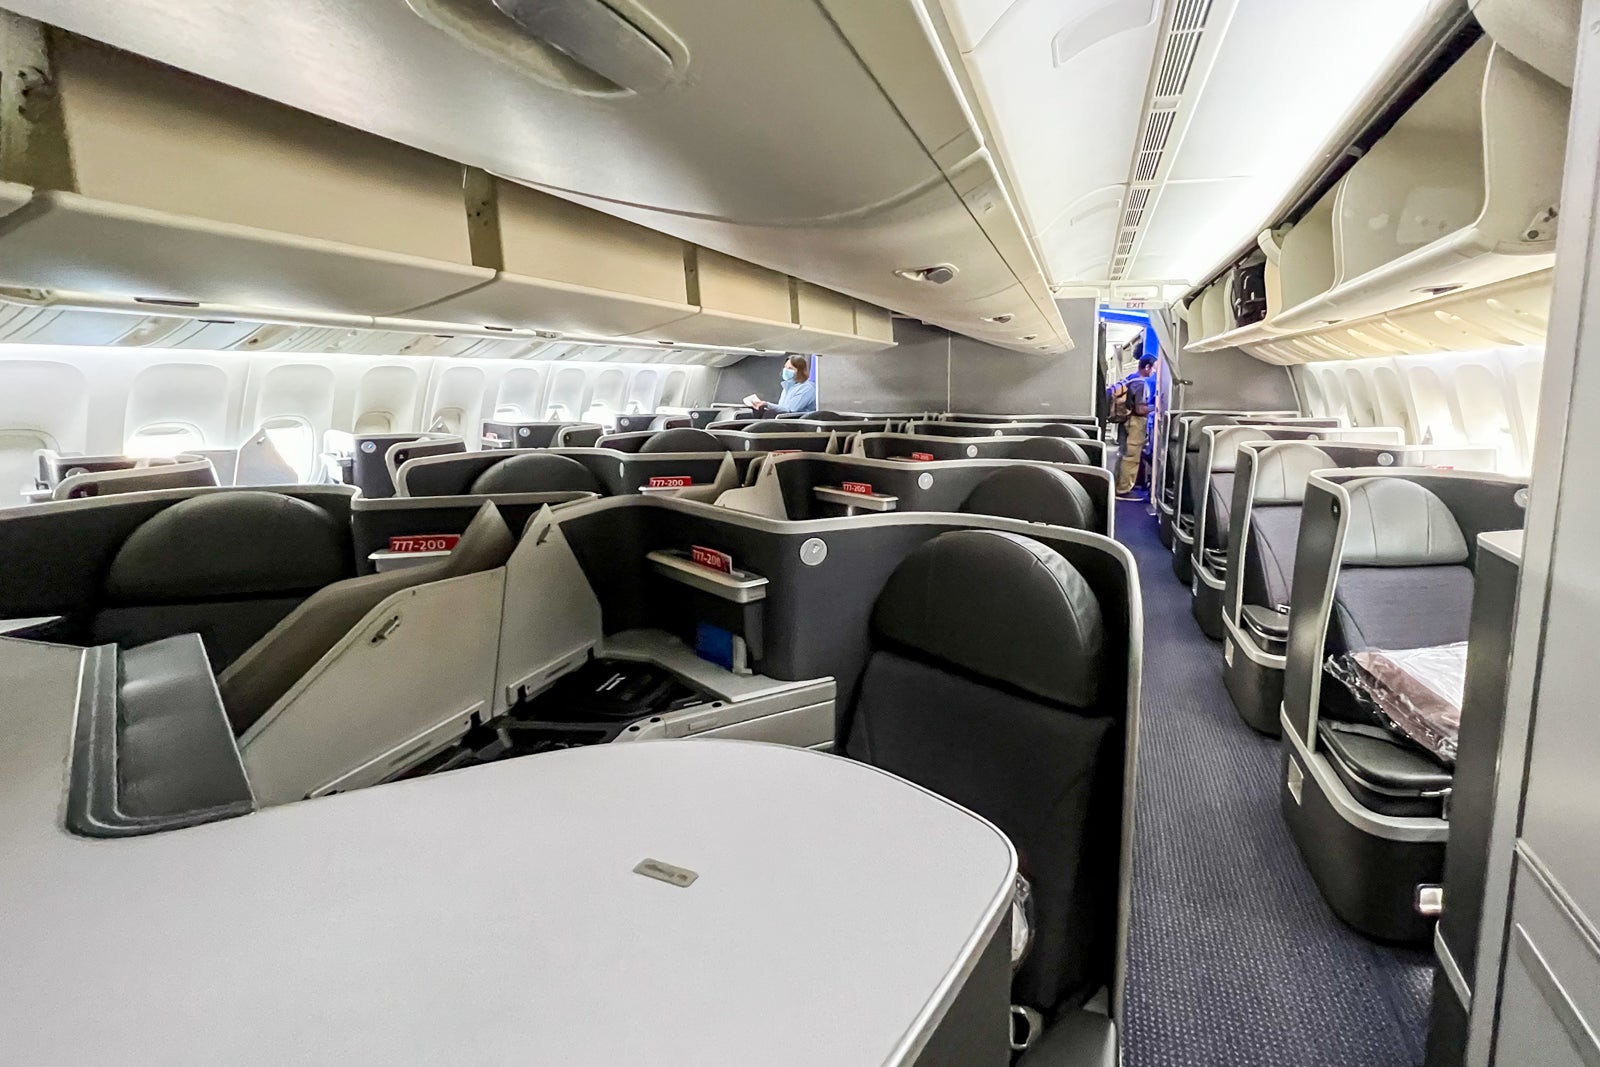 A review of American Airlines business class on the Boeing 777 from Rome to New York